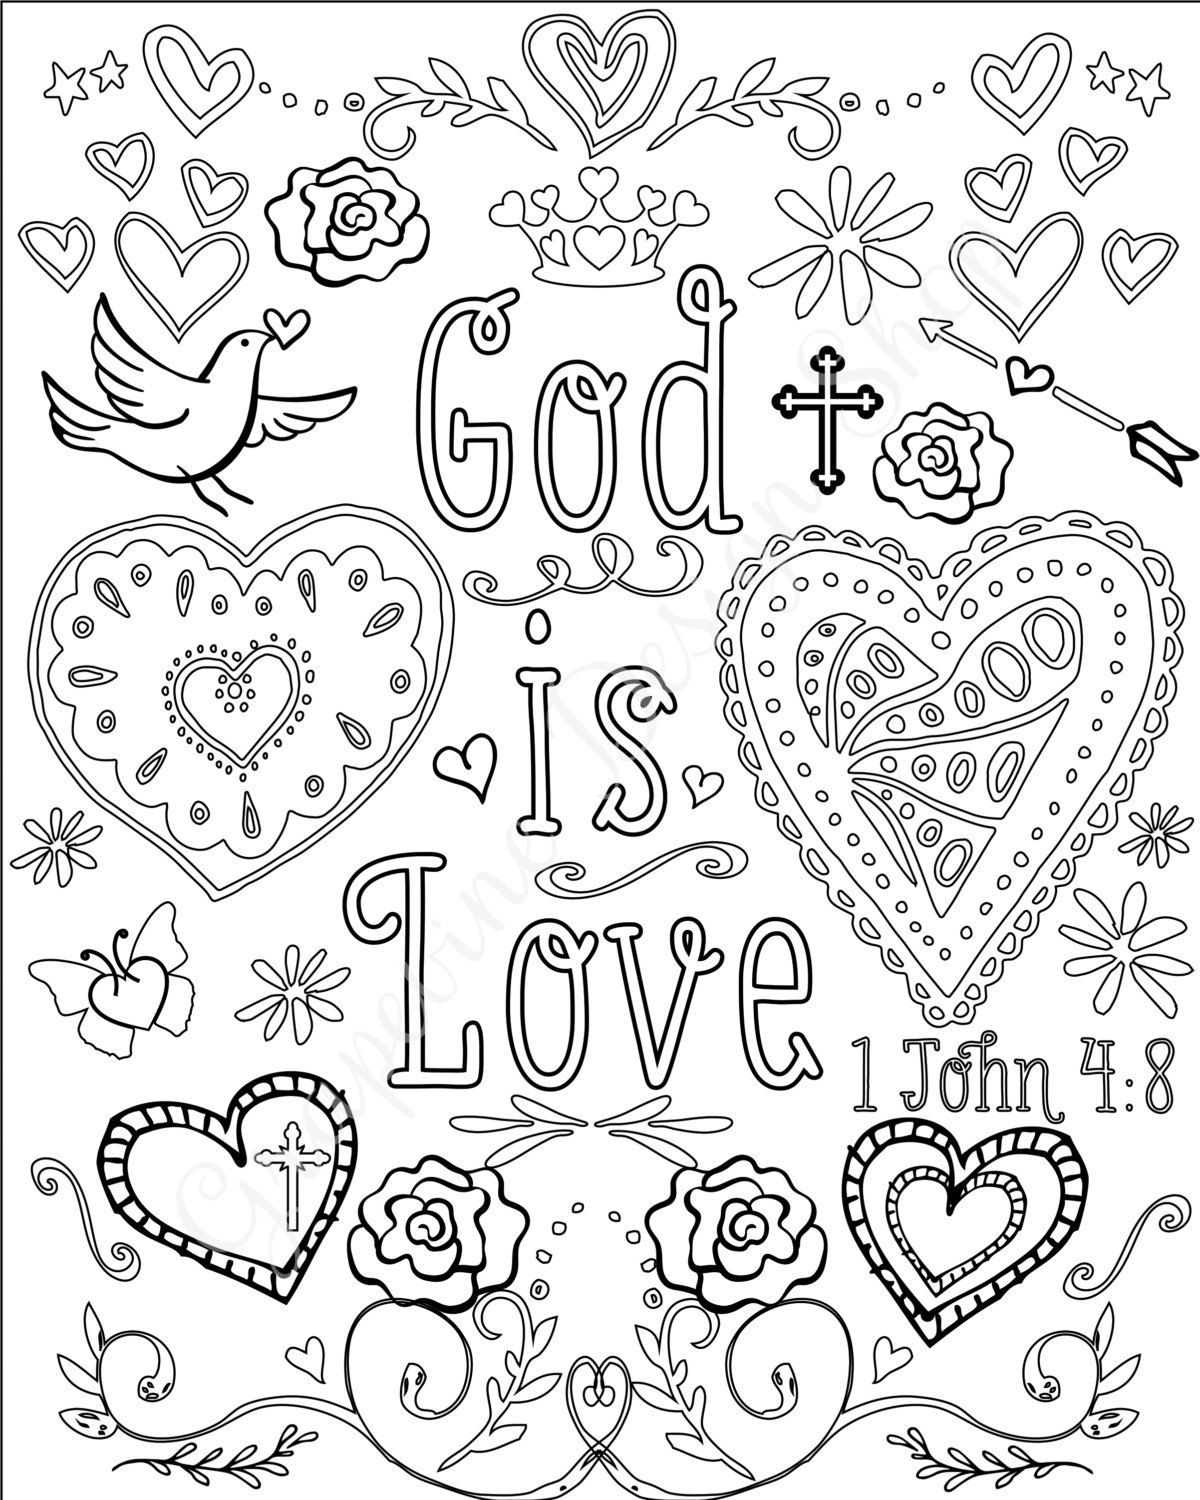 Preschool Valentines Day Coloring Pages Valentines Day Bible Verse Coloring Pages For Preschoolers Pdf Cool